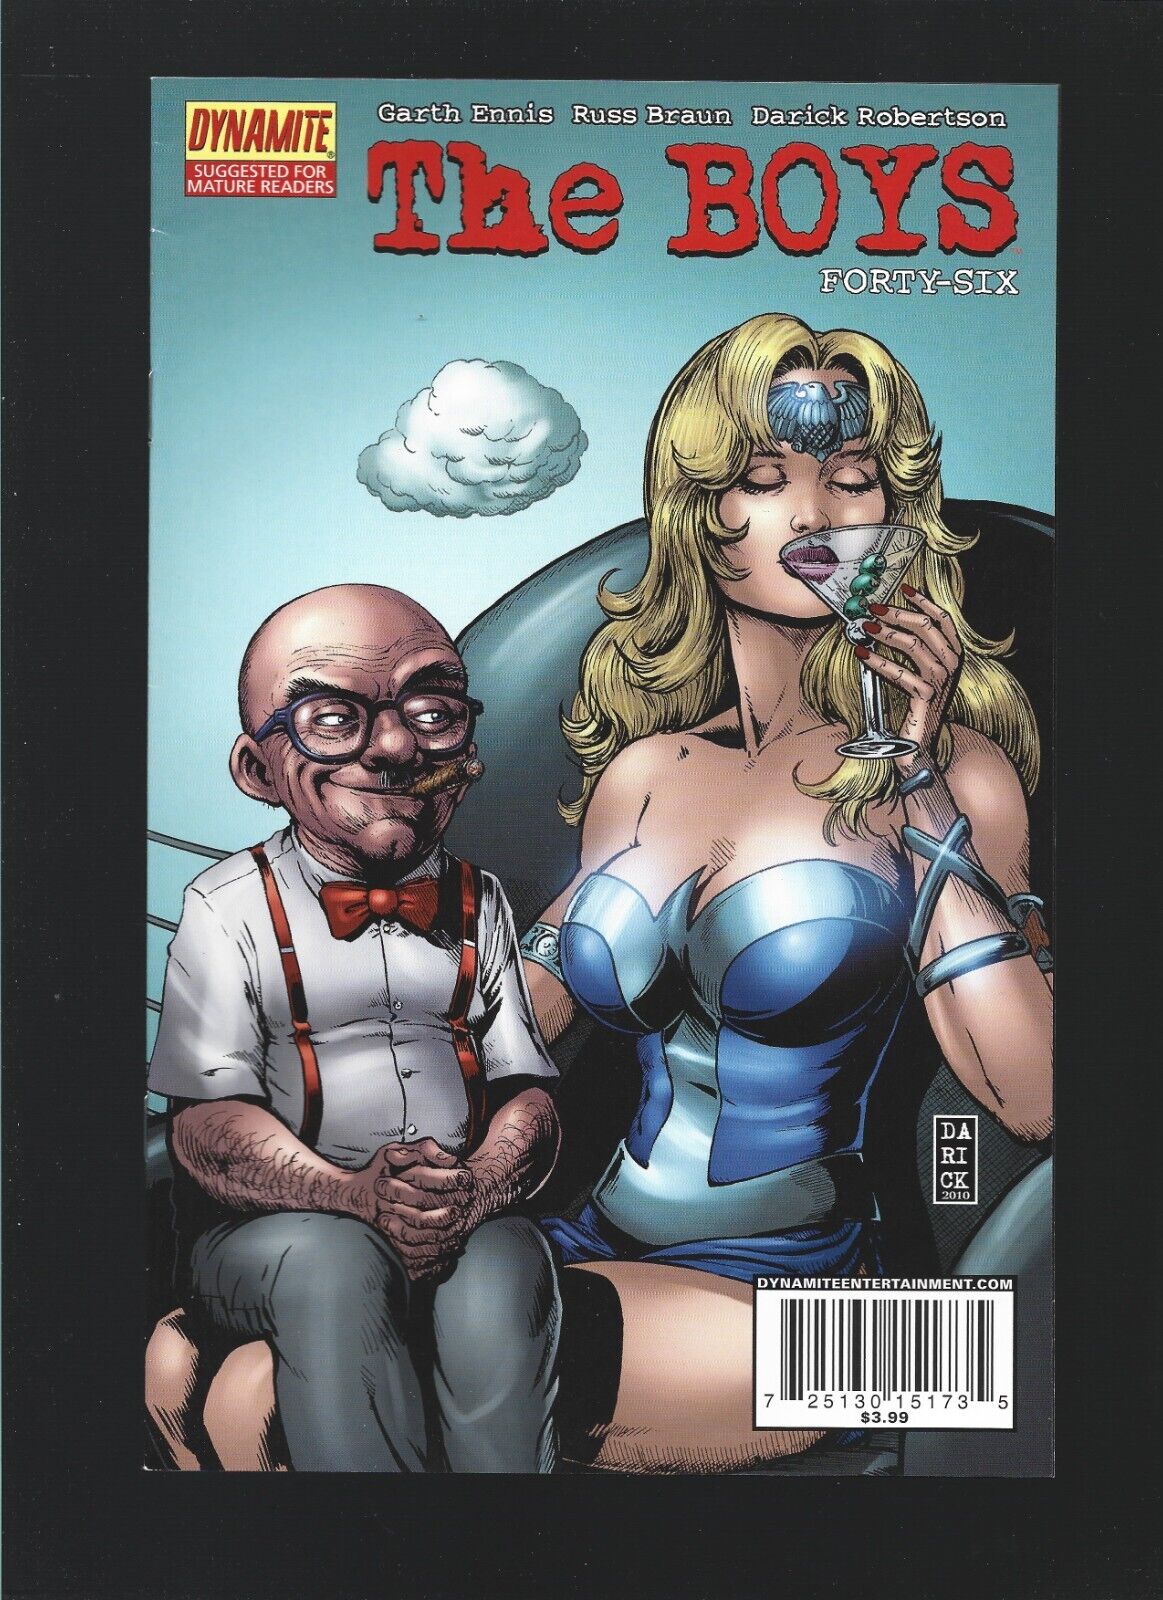 The Boys #46 UNLIMITED SHIPPING $4.99